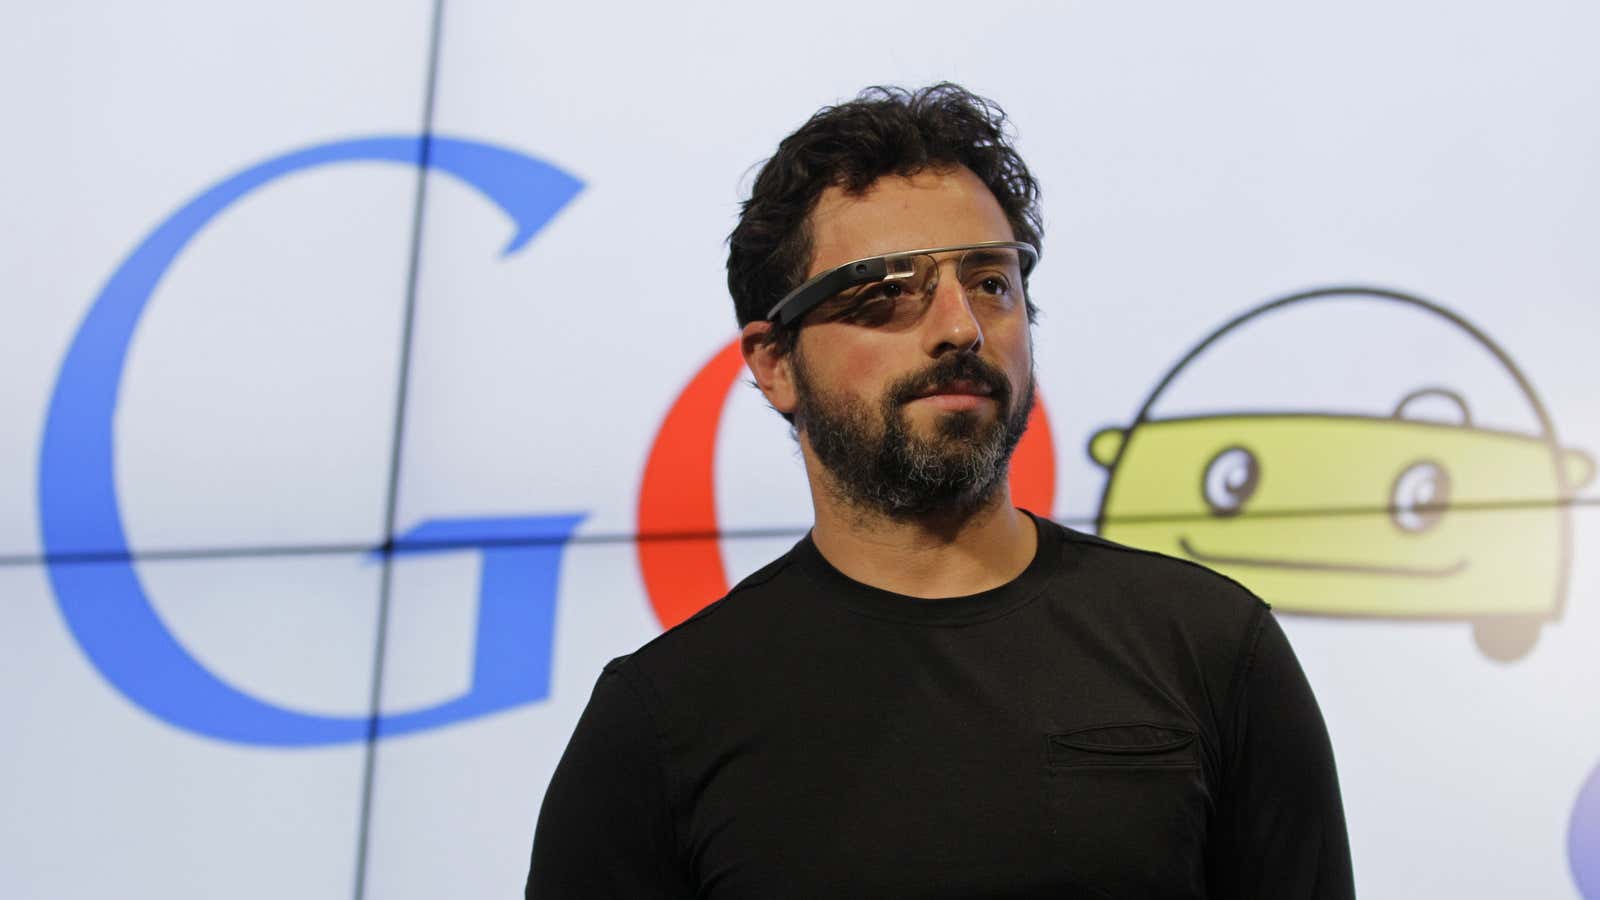 Sergey Brin can see a future without political parties.